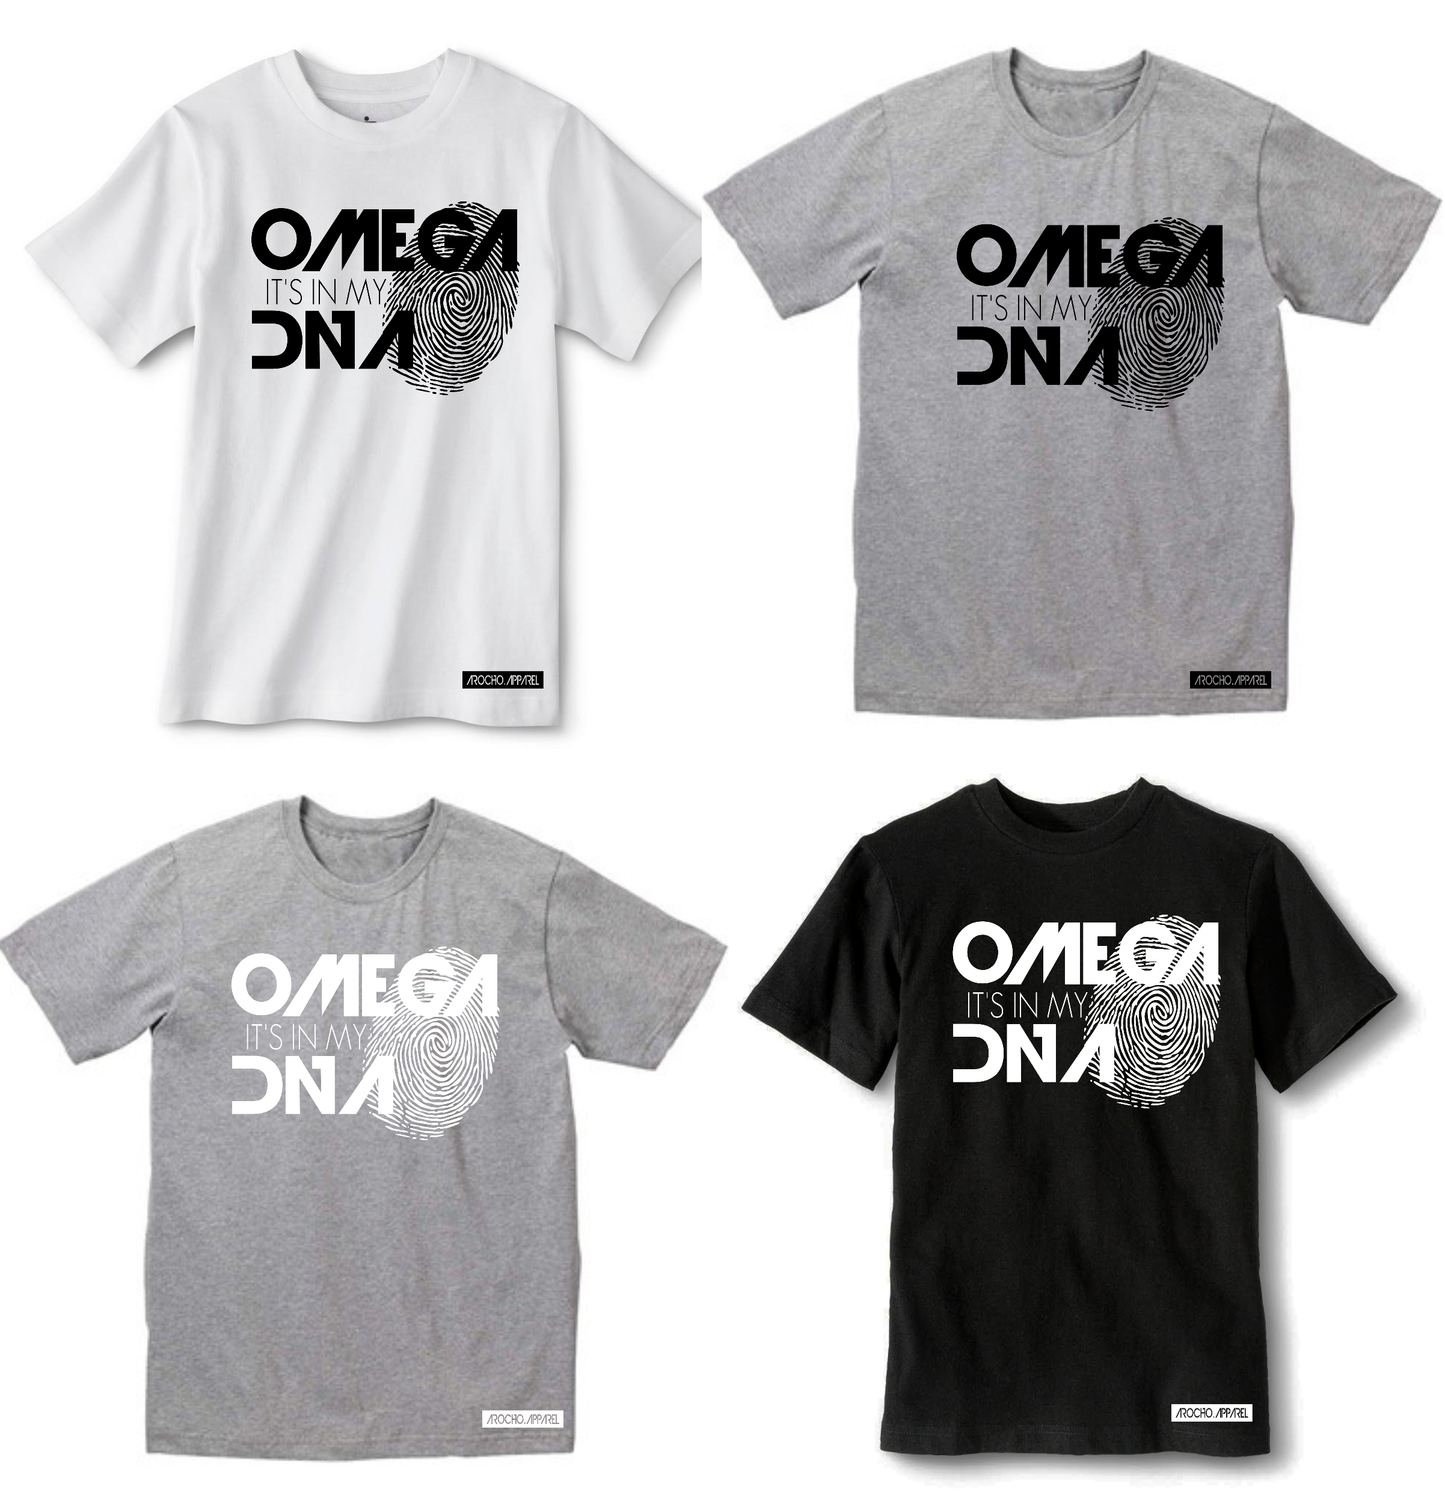 OMEGA IT'S IN MY DNA T-SHIRT